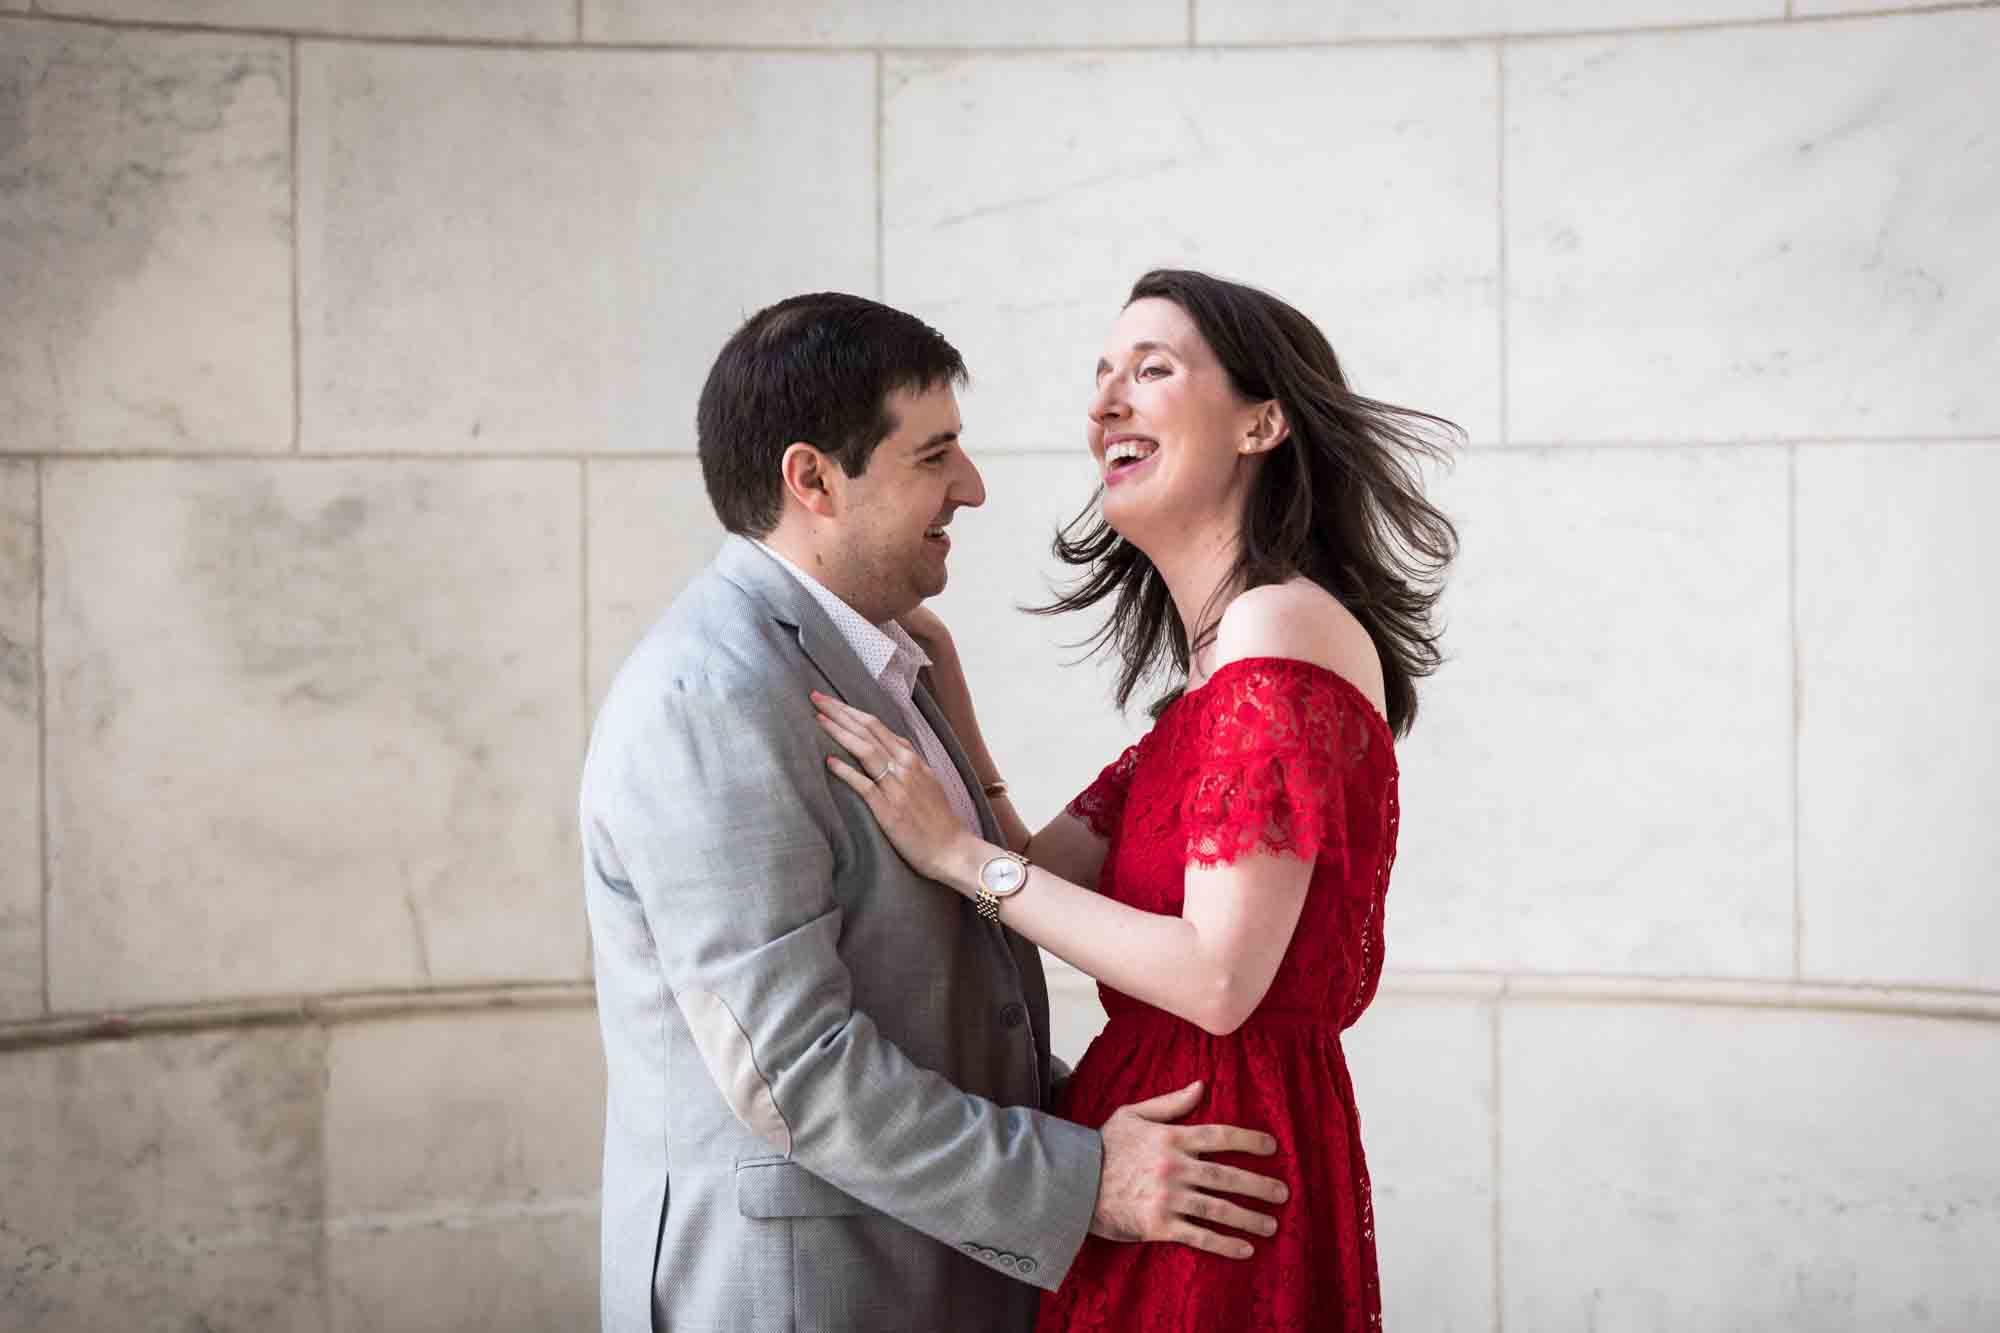 Man dancing in marble alcove with woman wearing red dress during a New York Public Library surprise proposal